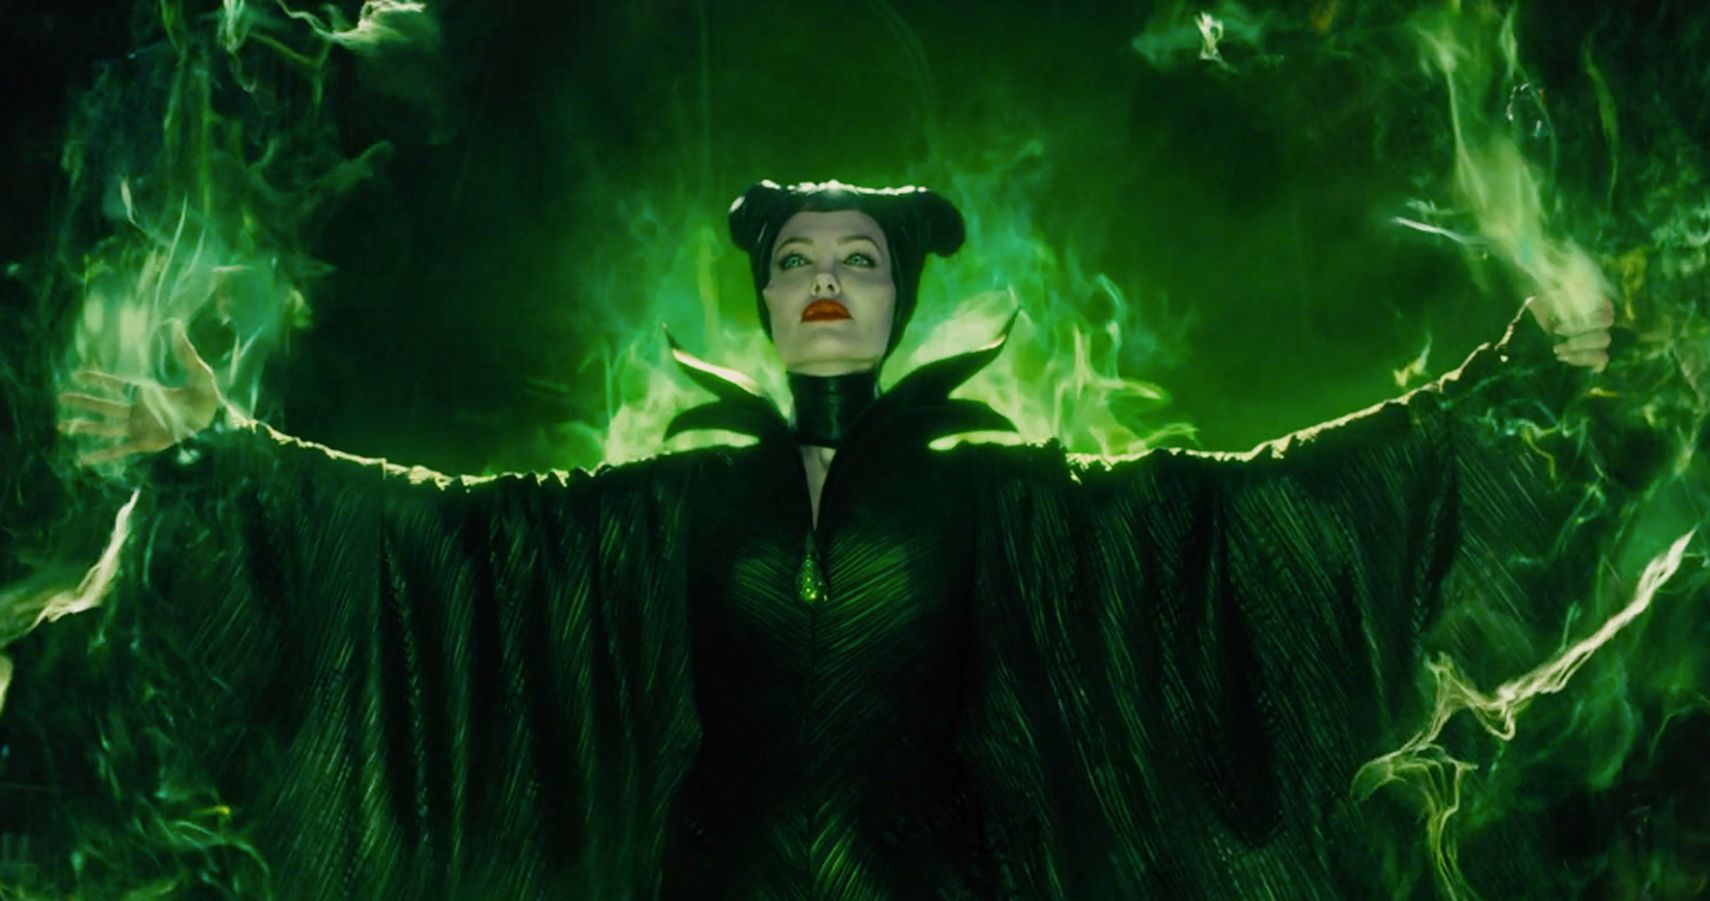 Lesson Learned from Maleficent. Maleficent is one of the many